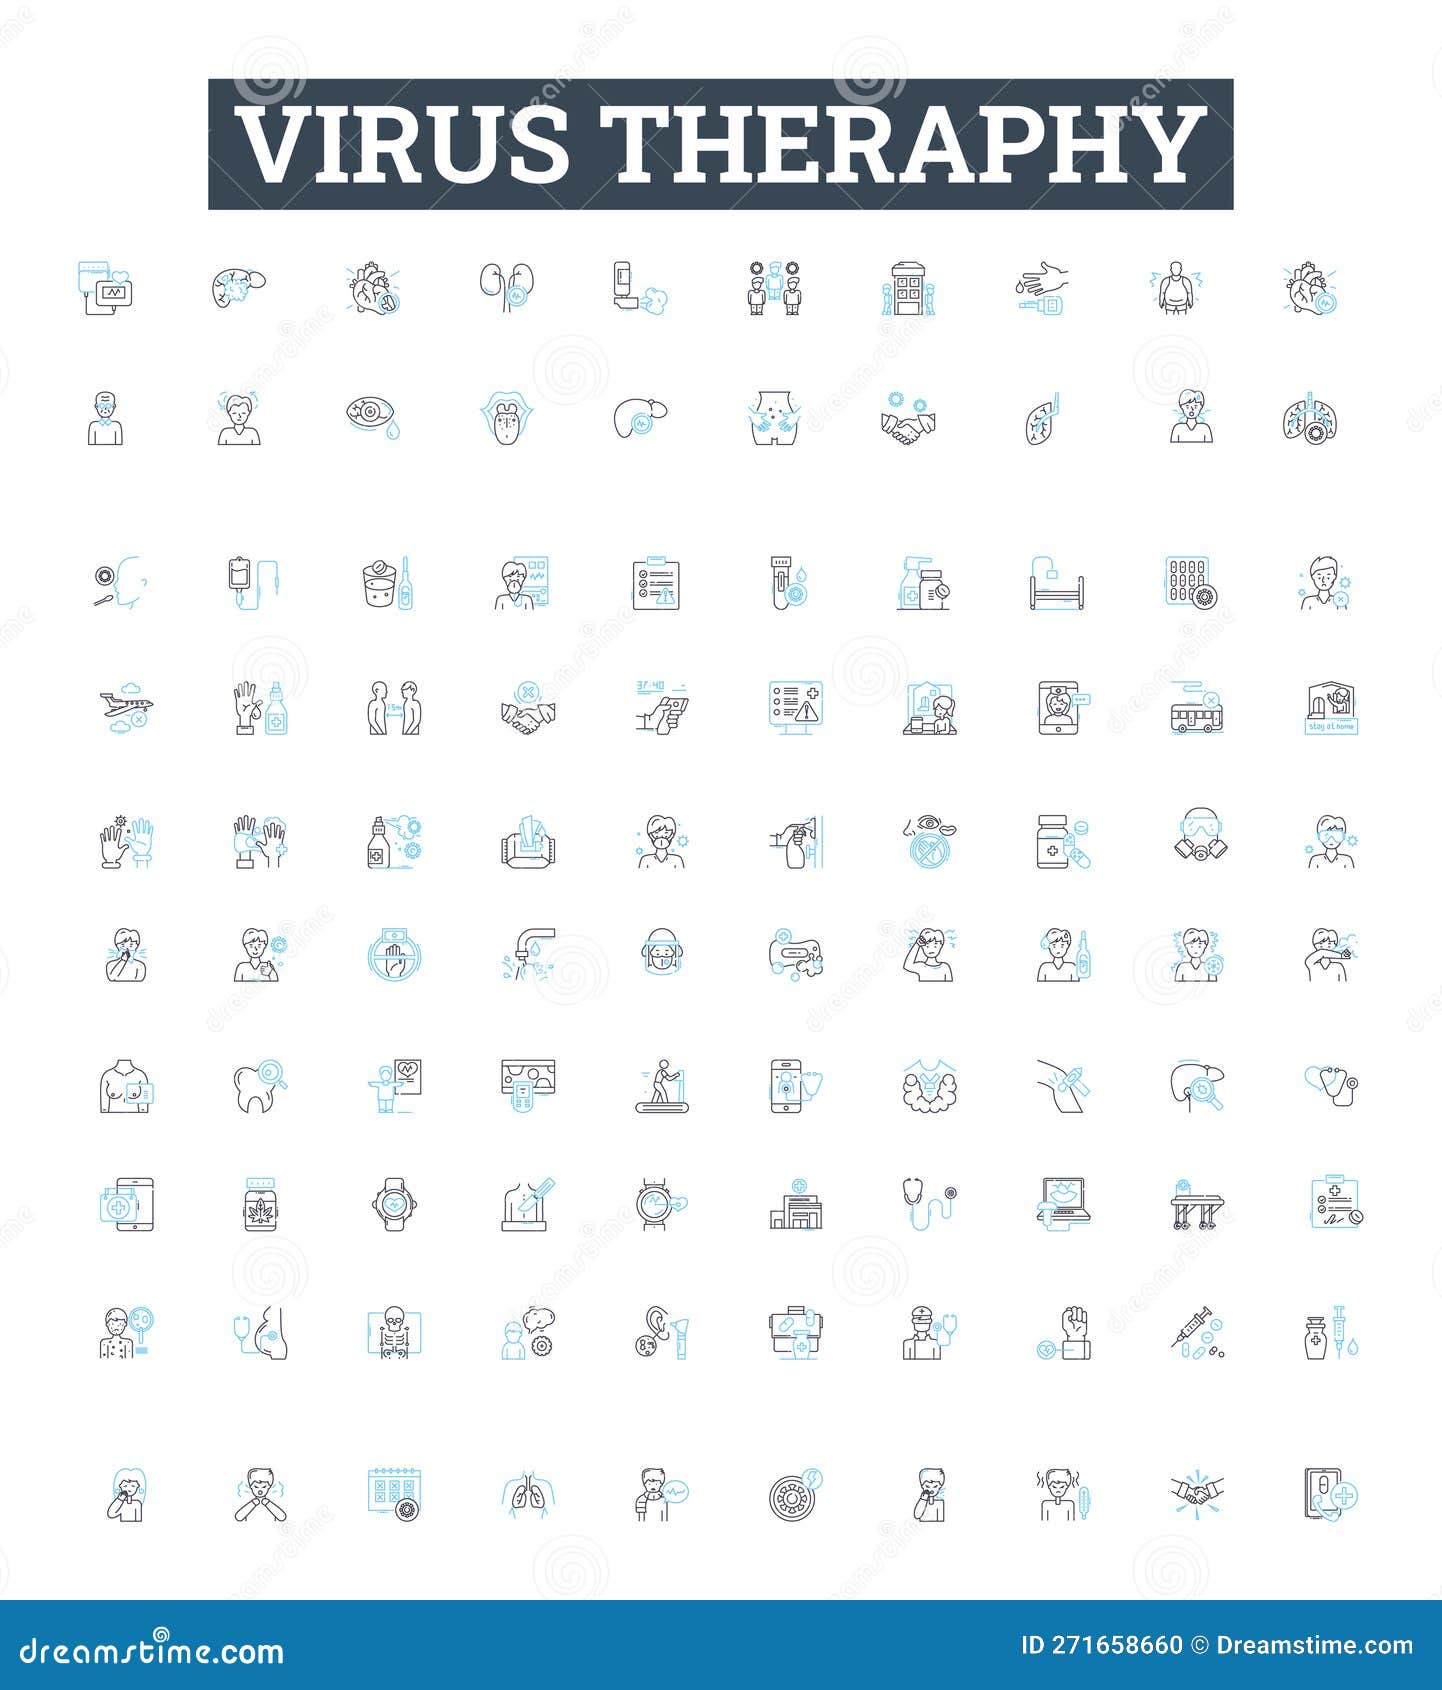 virus theraphy  line icons set. antiviral, viruscide, remedial, vaccine, bioinhibitor, prophylactic, syntropic